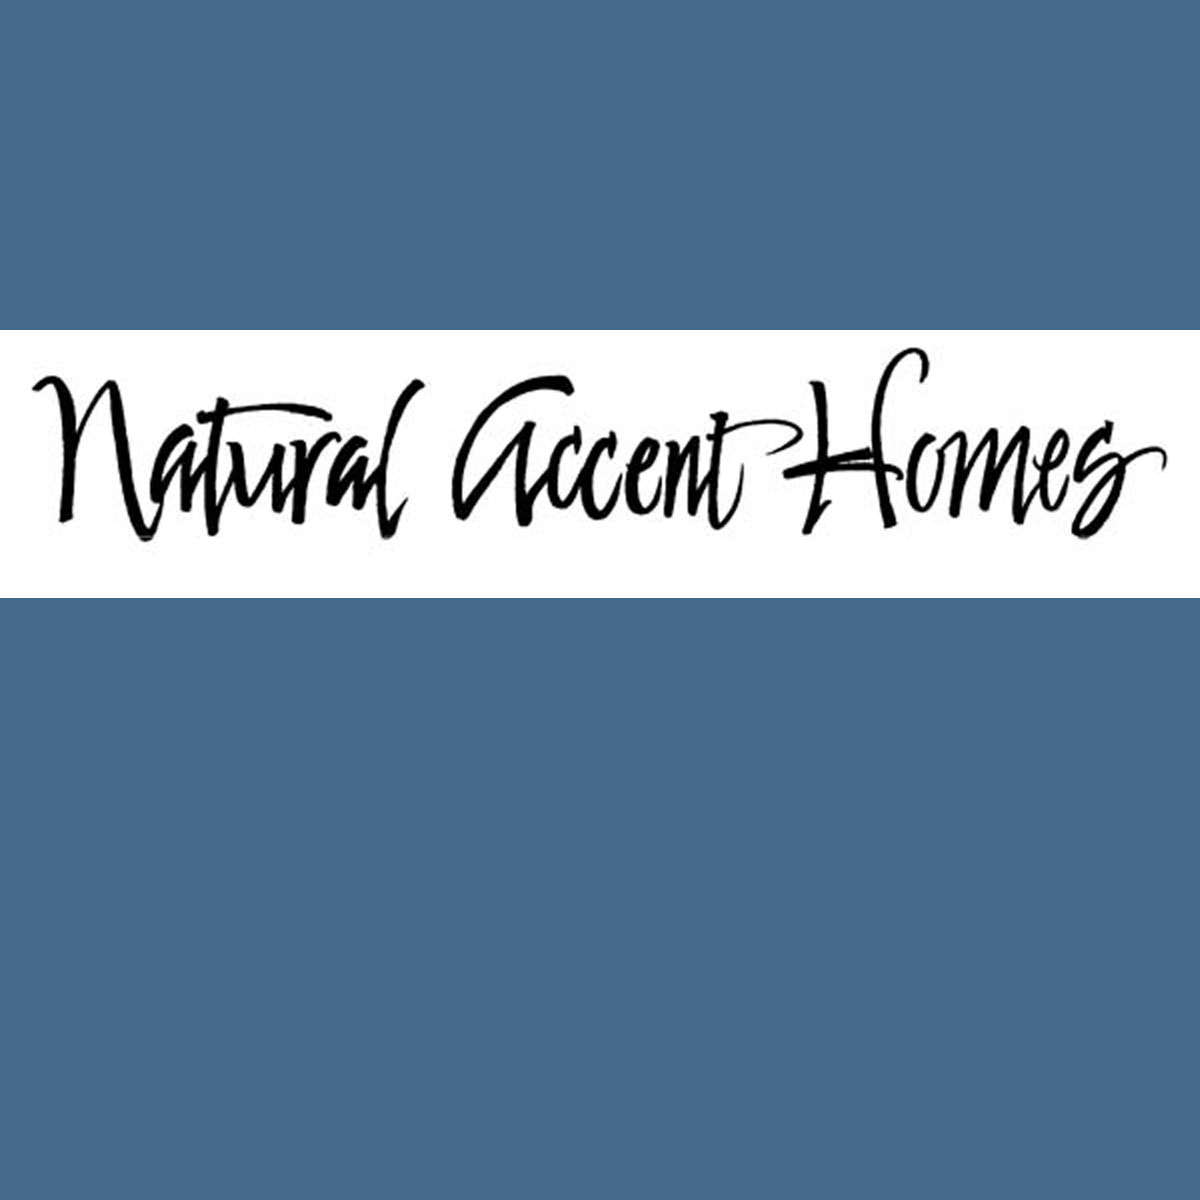 1_natural-accent